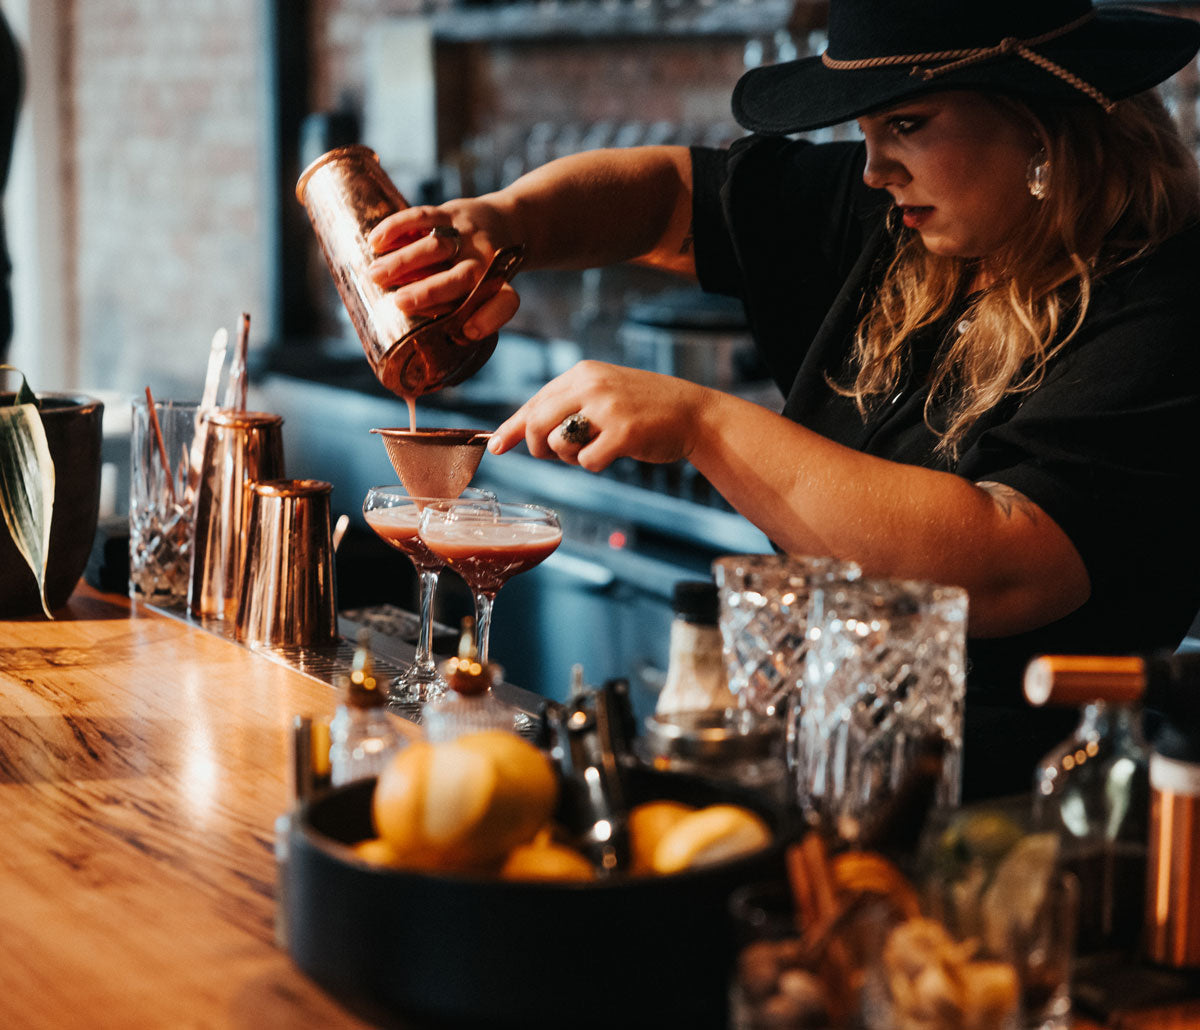 A women bartender is behind the bar, where she has just mixed a drink and is straining it into a cocktail glass. There is additional glass ware and other bar equipment lined up in front of her.